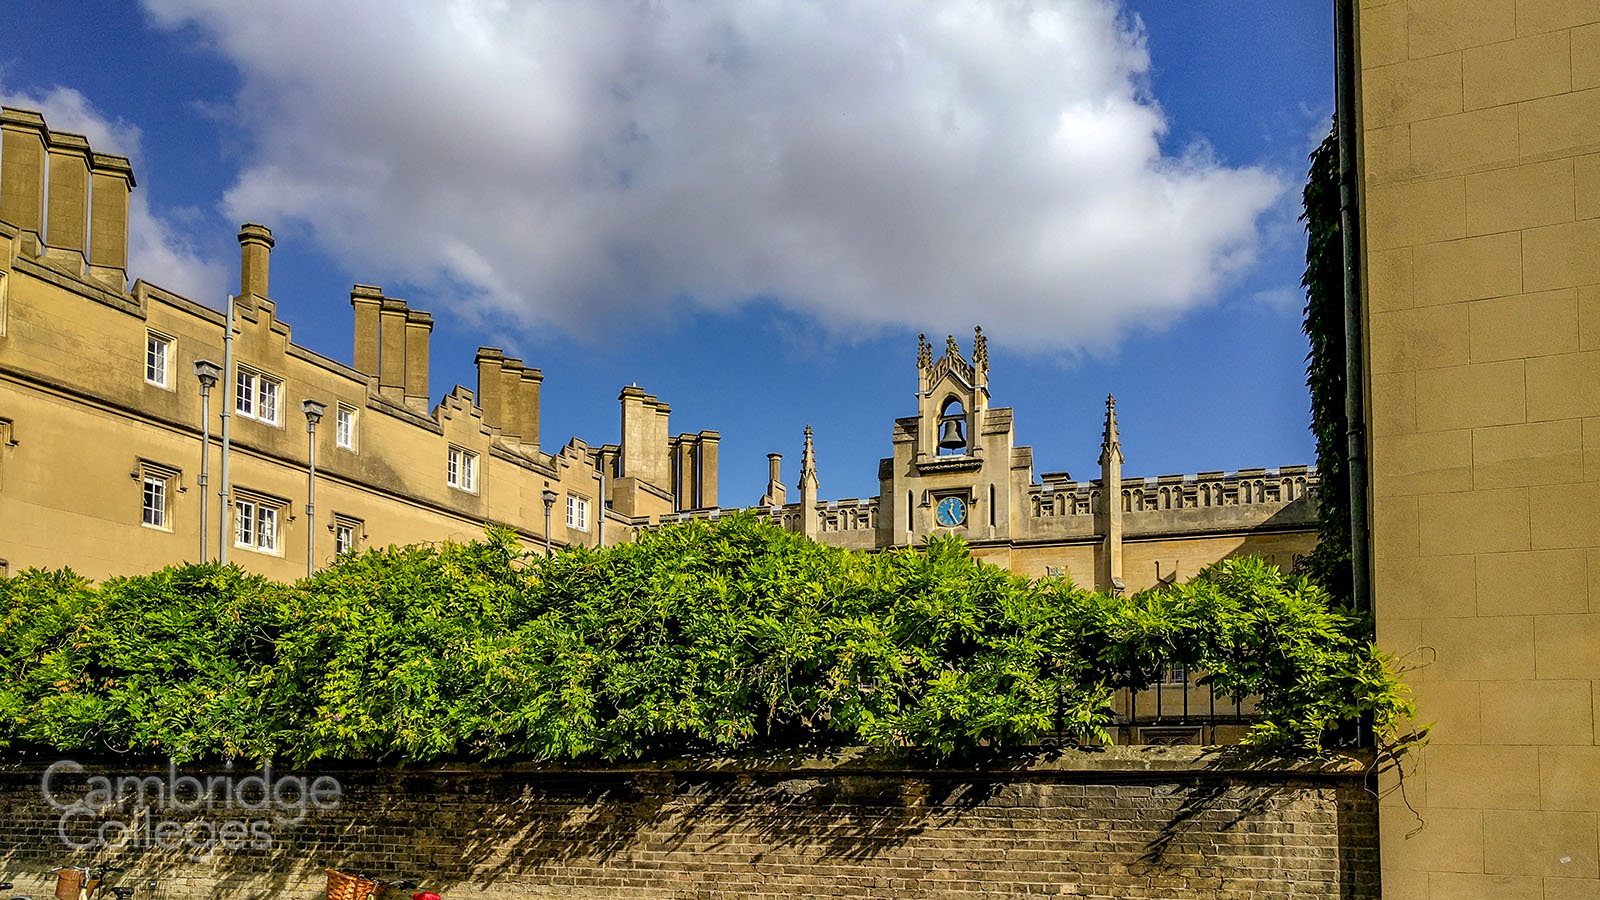 Sidney Sussex college as seen from the street